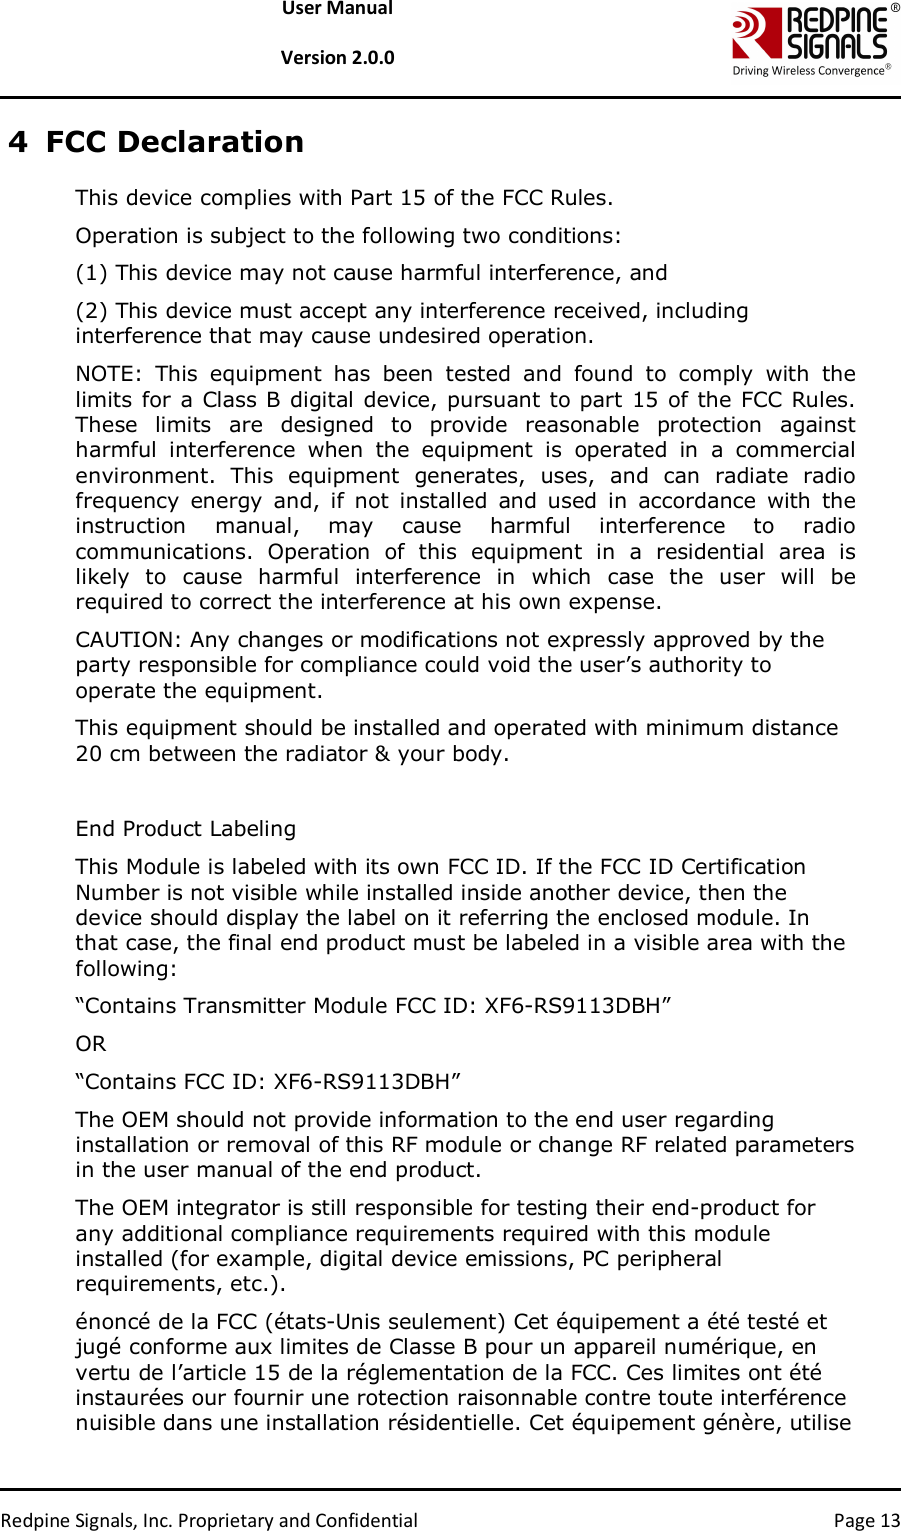   Redpine Signals, Inc. Proprietary and Confidential  Page 13 User Manual  Version 2.0.0 4 FCC Declaration This device complies with Part 15 of the FCC Rules.  Operation is subject to the following two conditions:  (1) This device may not cause harmful interference, and  (2) This device must accept any interference received, including interference that may cause undesired operation.  NOTE:  This  equipment  has  been  tested  and  found  to  comply  with  the limits for a Class B digital device, pursuant to part 15 of the FCC Rules. These  limits  are  designed  to  provide  reasonable  protection  against harmful  interference  when  the  equipment  is  operated  in  a  commercial environment.  This  equipment  generates,  uses,  and  can  radiate  radio frequency  energy  and,  if  not  installed  and  used  in  accordance  with  the instruction  manual,  may  cause  harmful  interference  to  radio communications.  Operation  of  this  equipment  in  a  residential  area  is likely  to  cause  harmful  interference  in  which  case  the  user  will  be required to correct the interference at his own expense.  CAUTION: Any changes or modifications not expressly approved by the party responsible for compliance could void the user’s authority to operate the equipment.  This equipment should be installed and operated with minimum distance 20 cm between the radiator &amp; your body.   End Product Labeling This Module is labeled with its own FCC ID. If the FCC ID Certification Number is not visible while installed inside another device, then the device should display the label on it referring the enclosed module. In that case, the final end product must be labeled in a visible area with the following:  “Contains Transmitter Module FCC ID: XF6-RS9113DBH”  OR  “Contains FCC ID: XF6-RS9113DBH”  The OEM should not provide information to the end user regarding installation or removal of this RF module or change RF related parameters in the user manual of the end product. The OEM integrator is still responsible for testing their end-product for any additional compliance requirements required with this module installed (for example, digital device emissions, PC peripheral requirements, etc.).  énoncé de la FCC (états-Unis seulement) Cet équipement a été testé et jugé conforme aux limites de Classe B pour un appareil numérique, en vertu de l’article 15 de la réglementation de la FCC. Ces limites ont été instaurées our fournir une rotection raisonnable contre toute interférence nuisible dans une installation résidentielle. Cet équipement génère, utilise 